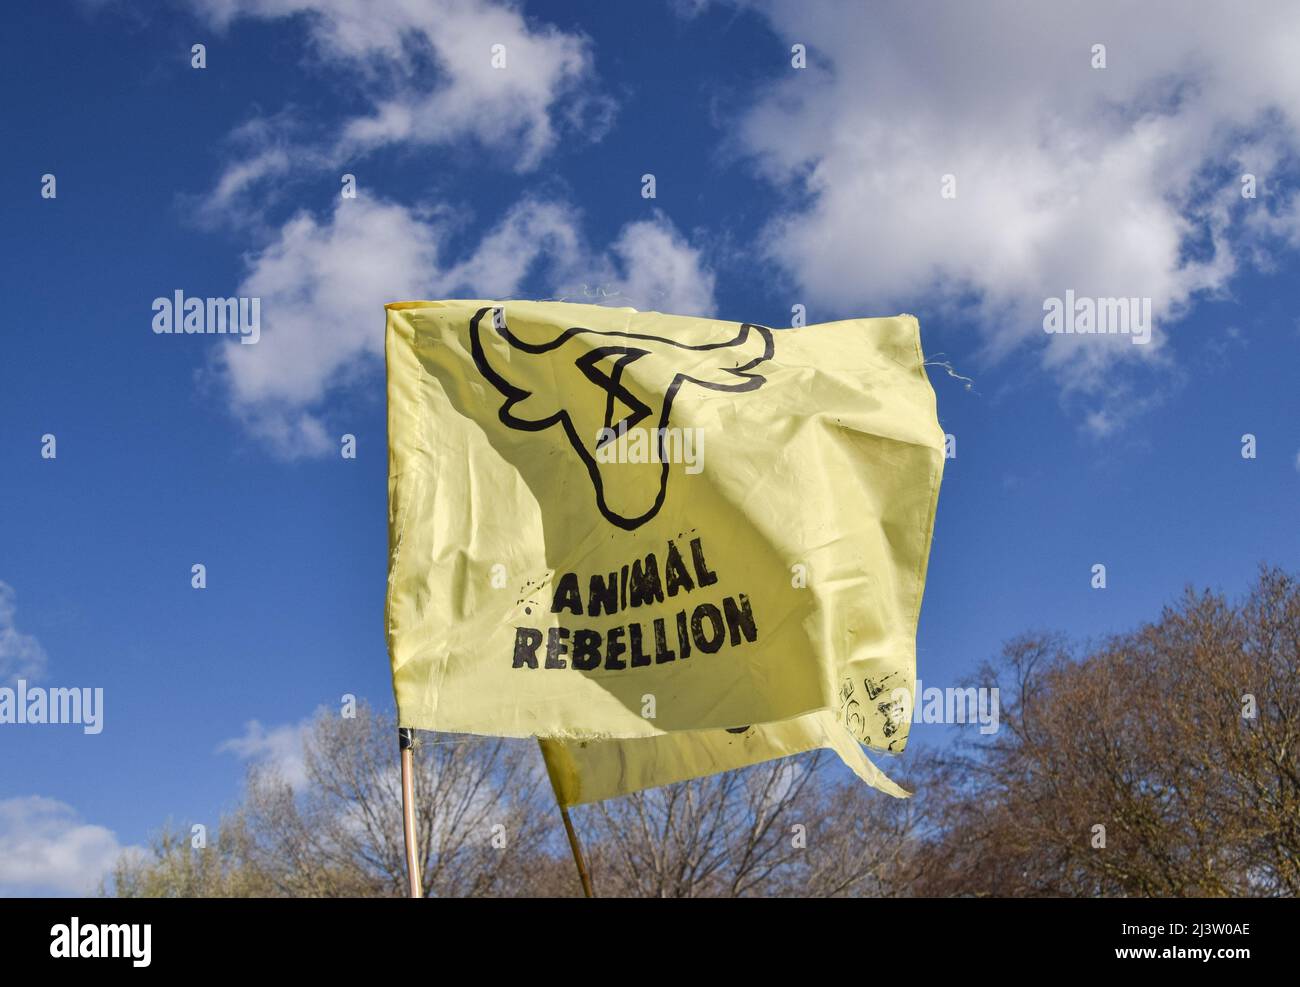 London, UK. 9th April 2022. A protester holds an Animal Rebellion flag in Hyde Park. Thousands of Extinction Rebellion protesters marched through central London and blocked the streets, calling on the government to end fossil fuels and act on climate change. Stock Photo